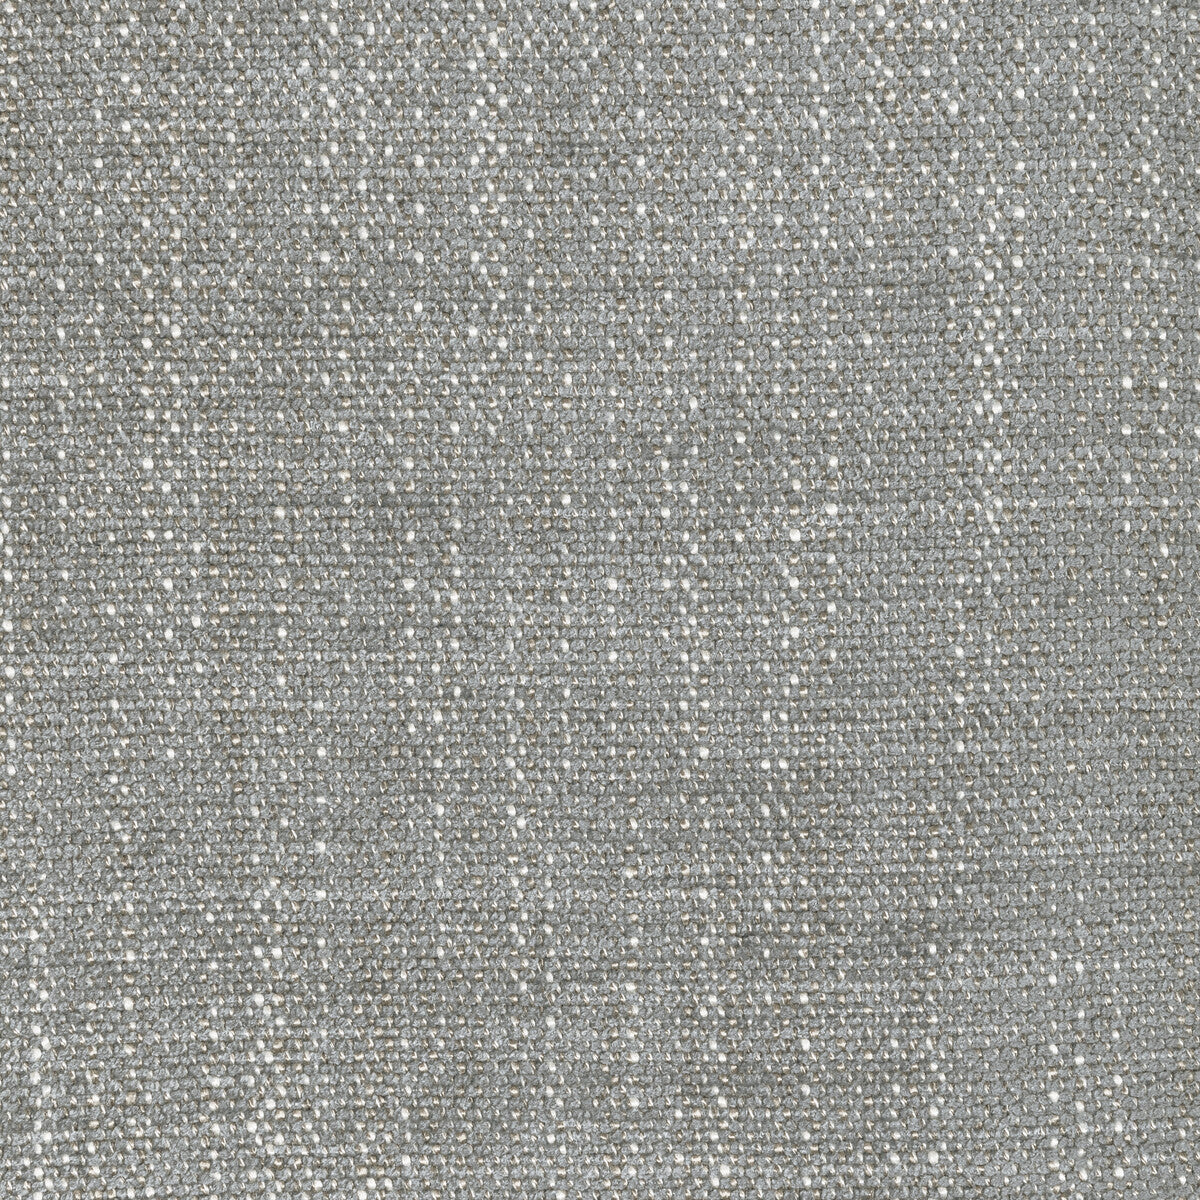 Kravet Design fabric in 36408-52 color - pattern 36408.52.0 - by Kravet Design in the Performance Crypton Home collection